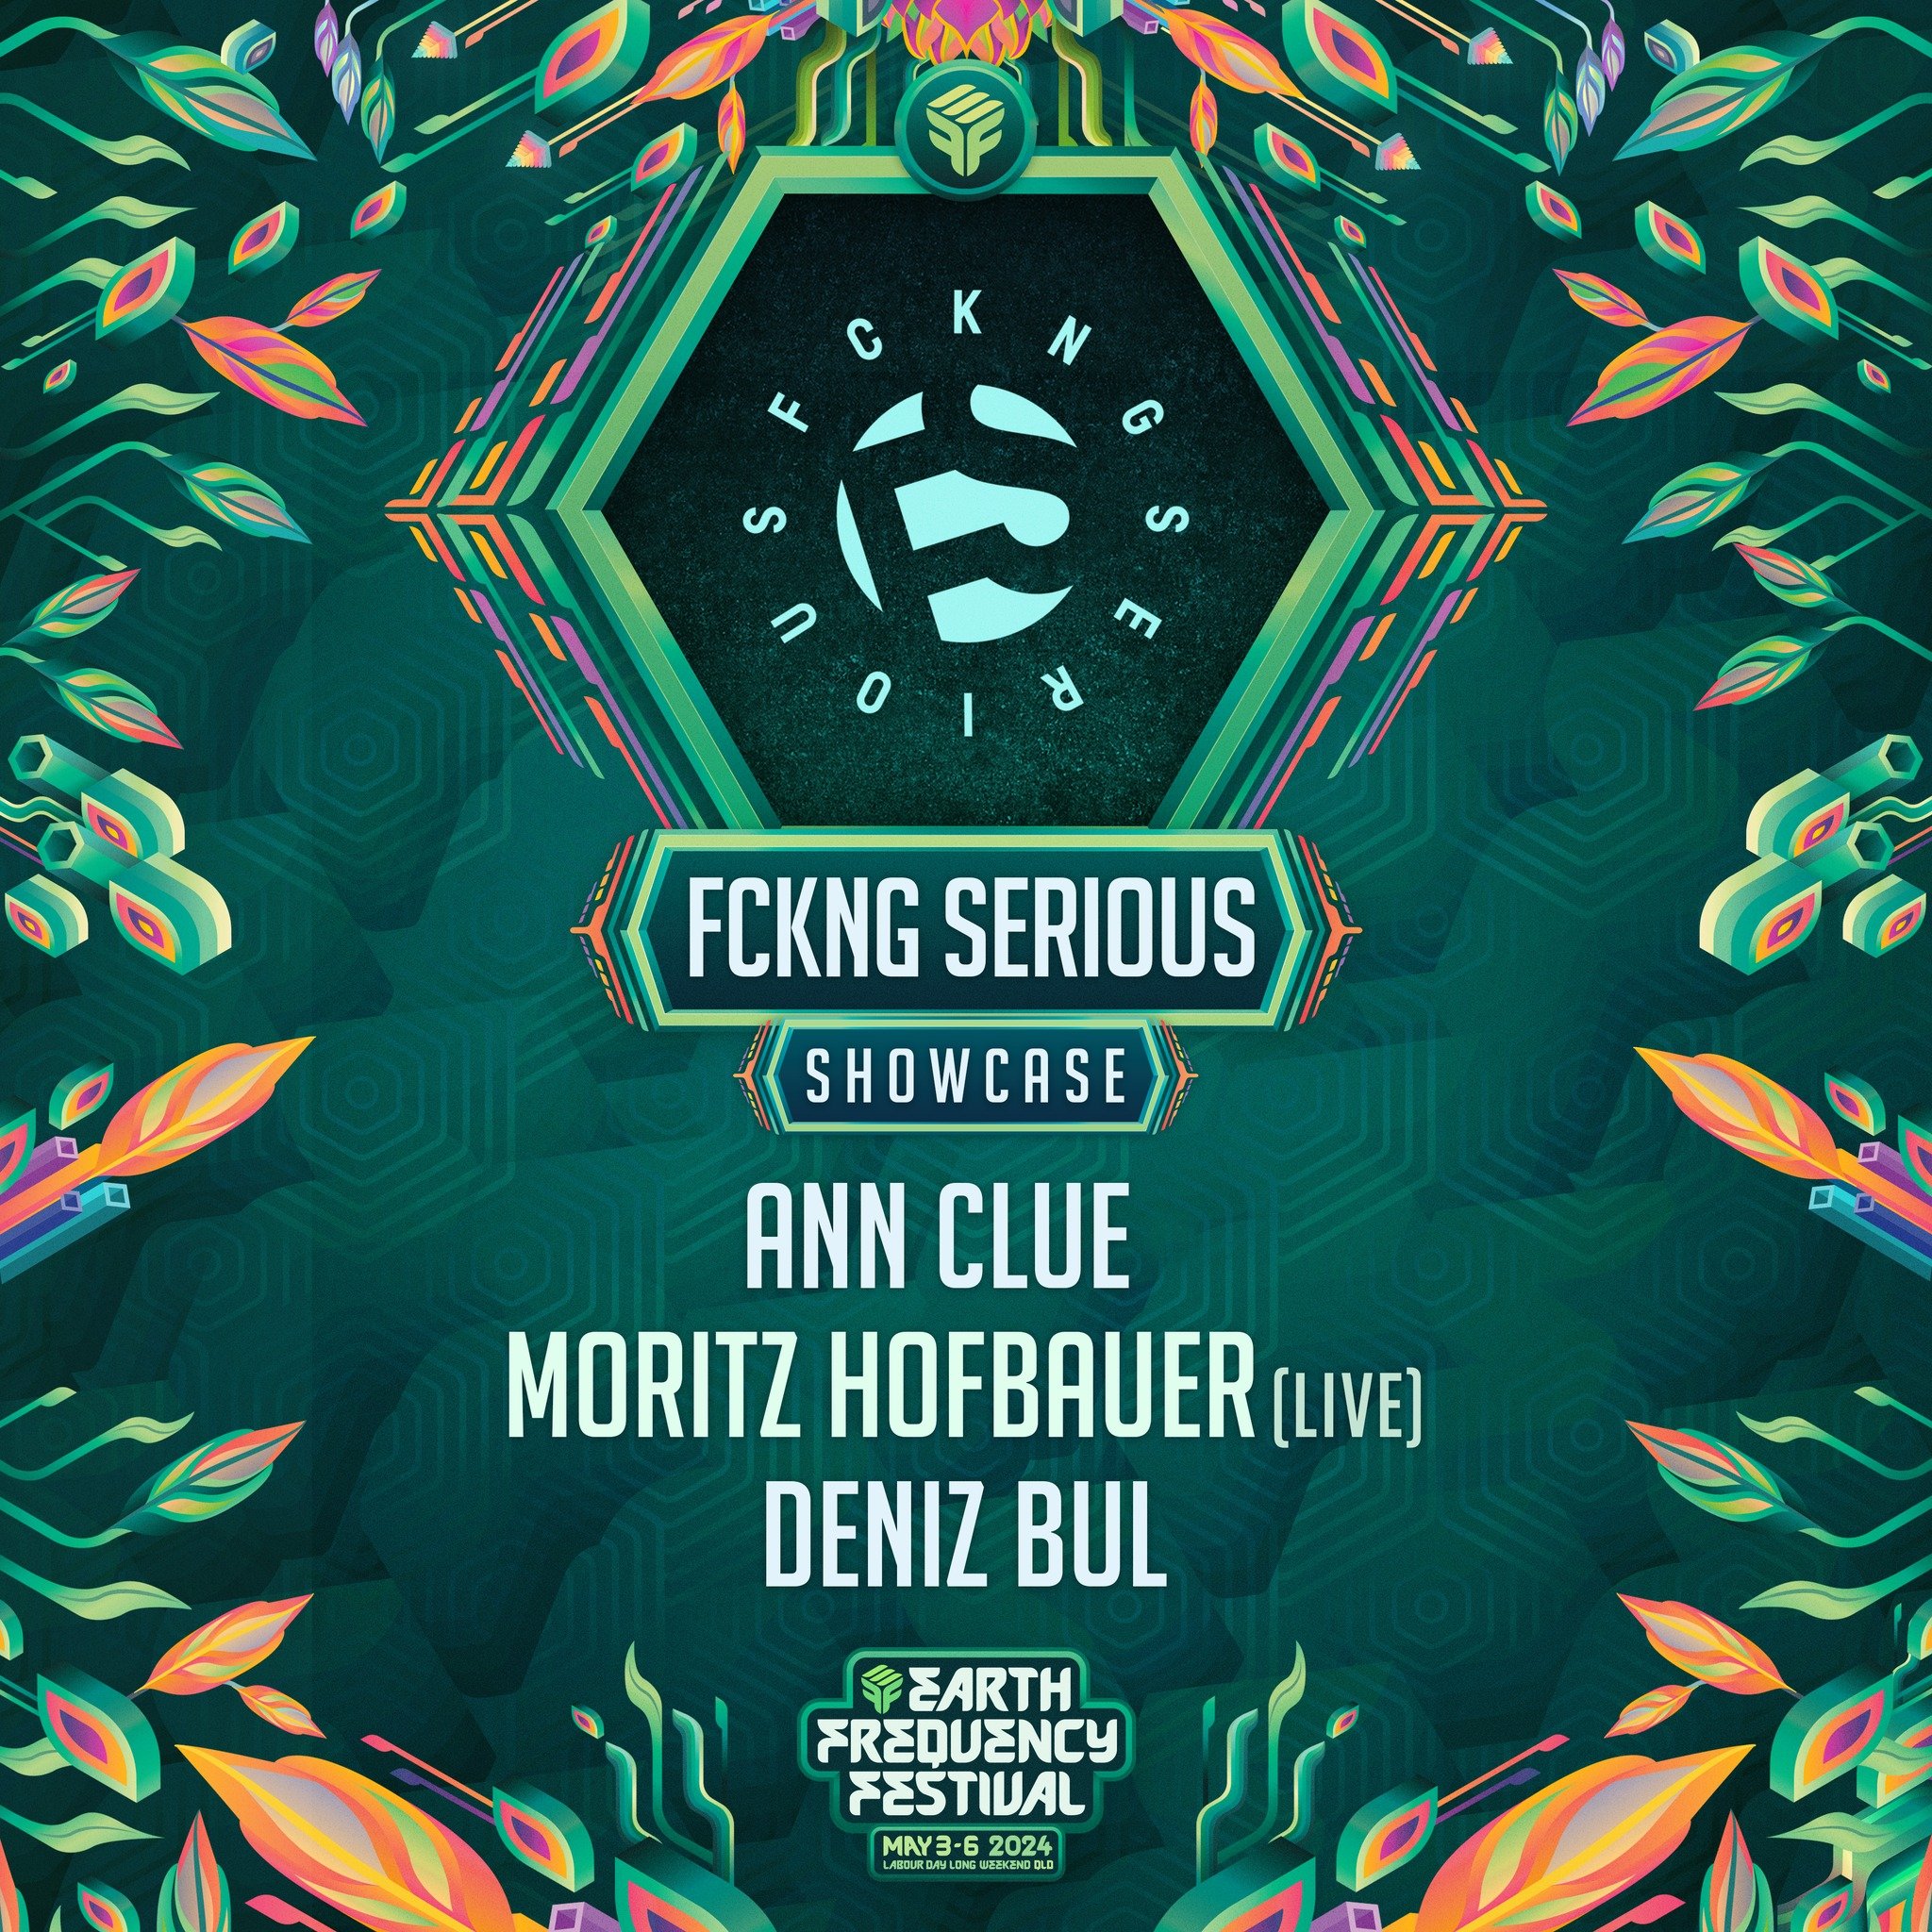 Sunday evening at EFF2024 is looking pretty good with 4 hours of FCKNG SERIOUS with Ann Clue, Moritz Hofbauer and Deniz Bul bringing their unique styles of driving and electric techno in the great outdoors. Unmissable! ⚡️🔥
🎟️ EFF2024 tickets : http